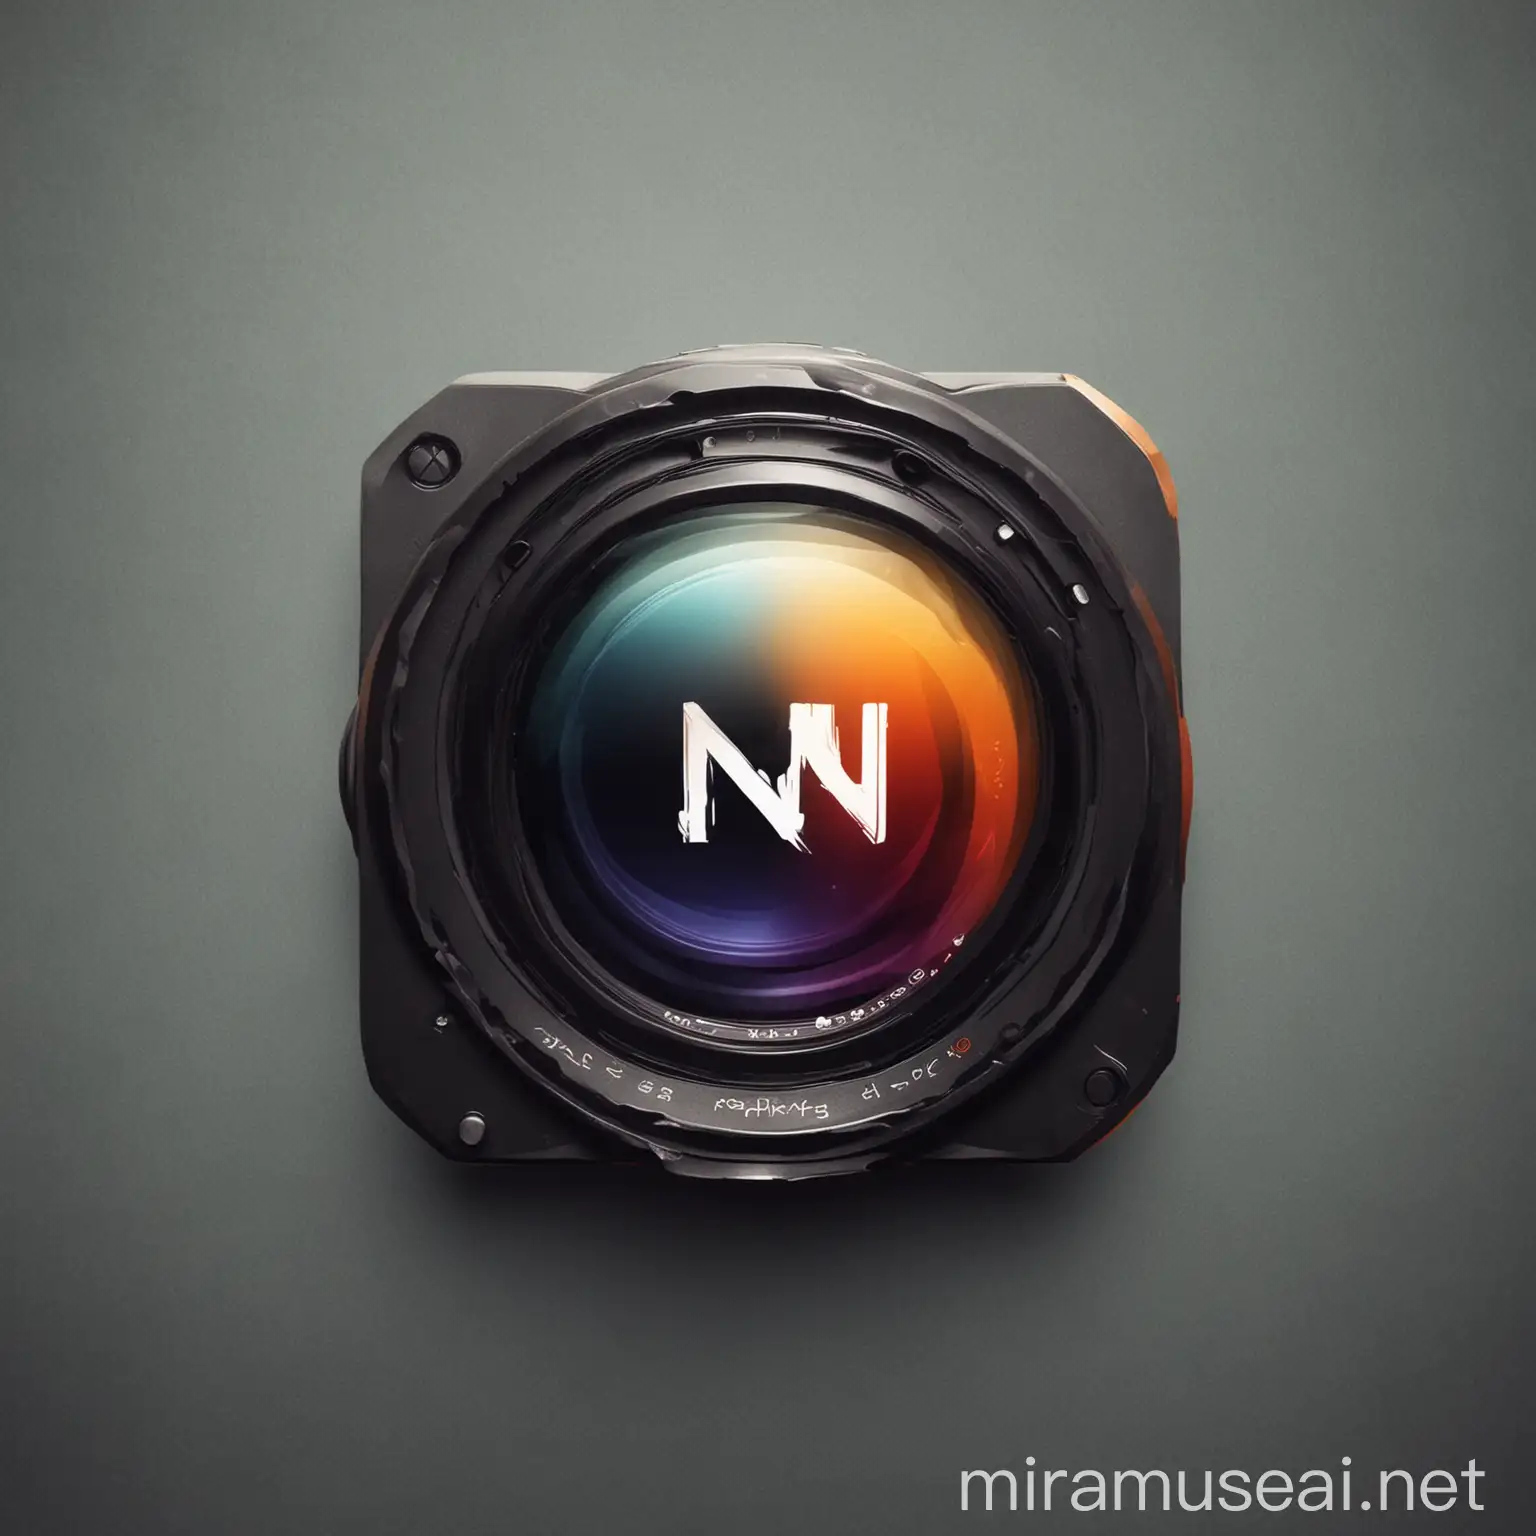 I went a logo created by letter N & graphics symbol,camera lens
that represented graphics studio